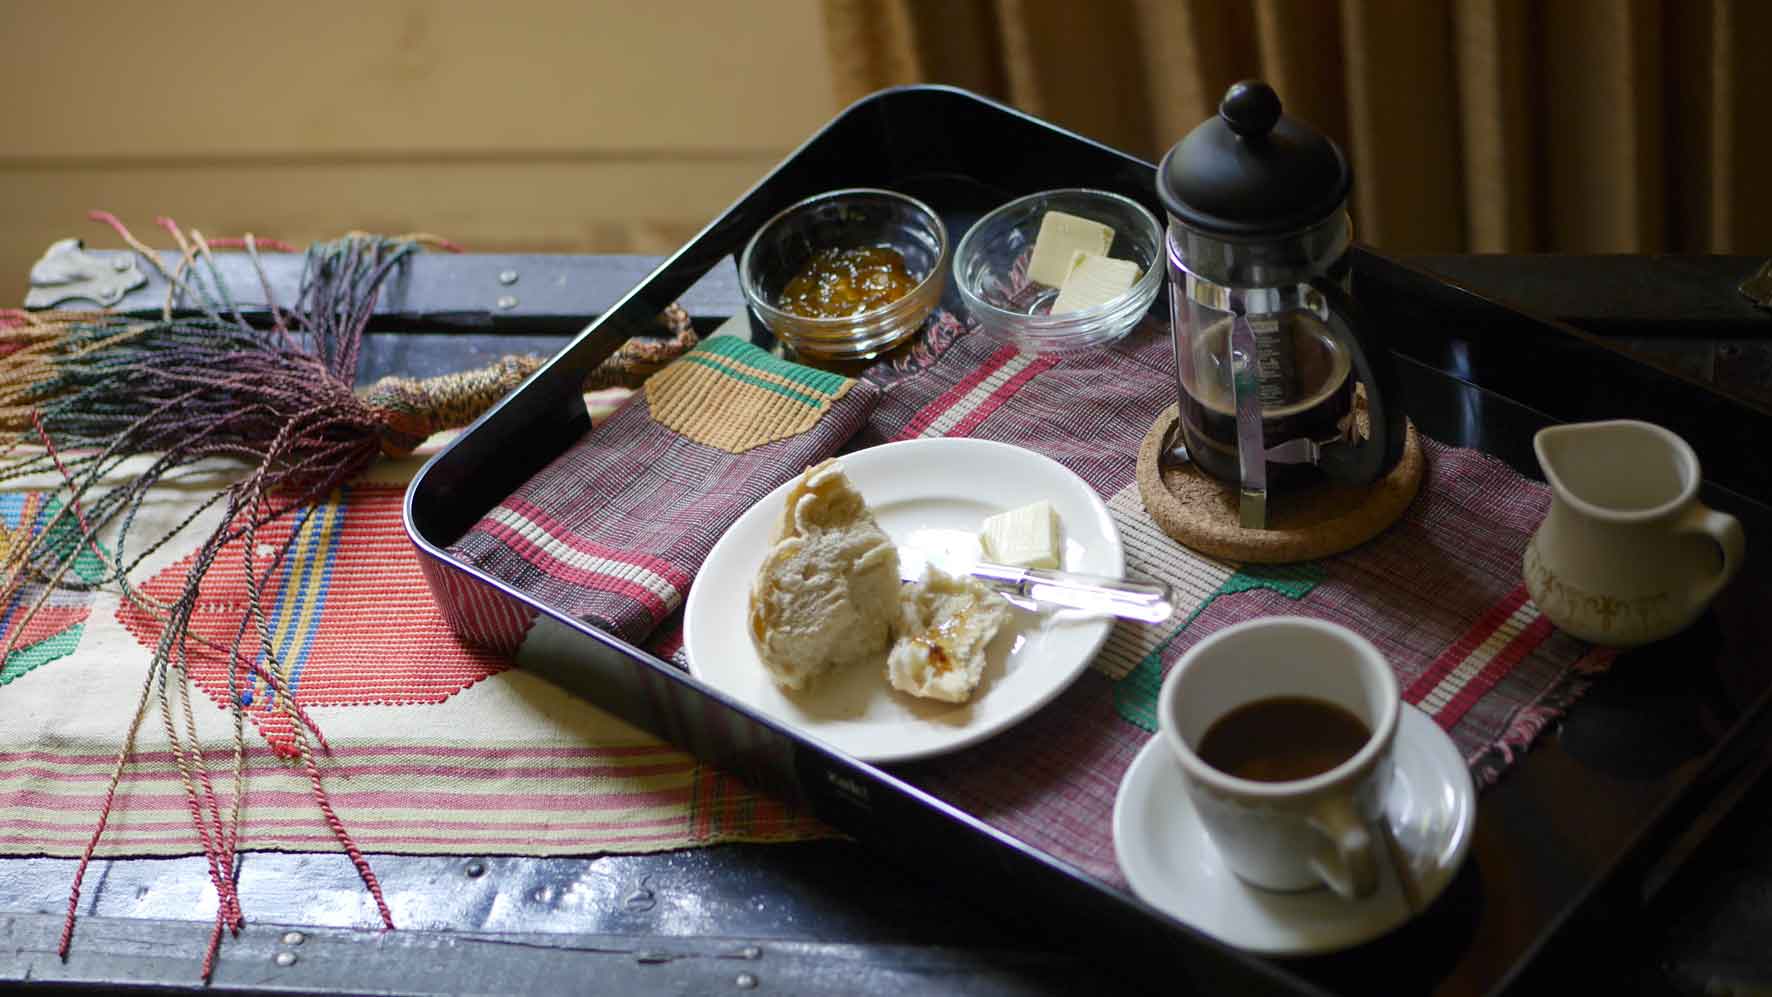 Peet's Congo Kivu Coffee Served on Tray with West Africa n textiles woven in 1960s.